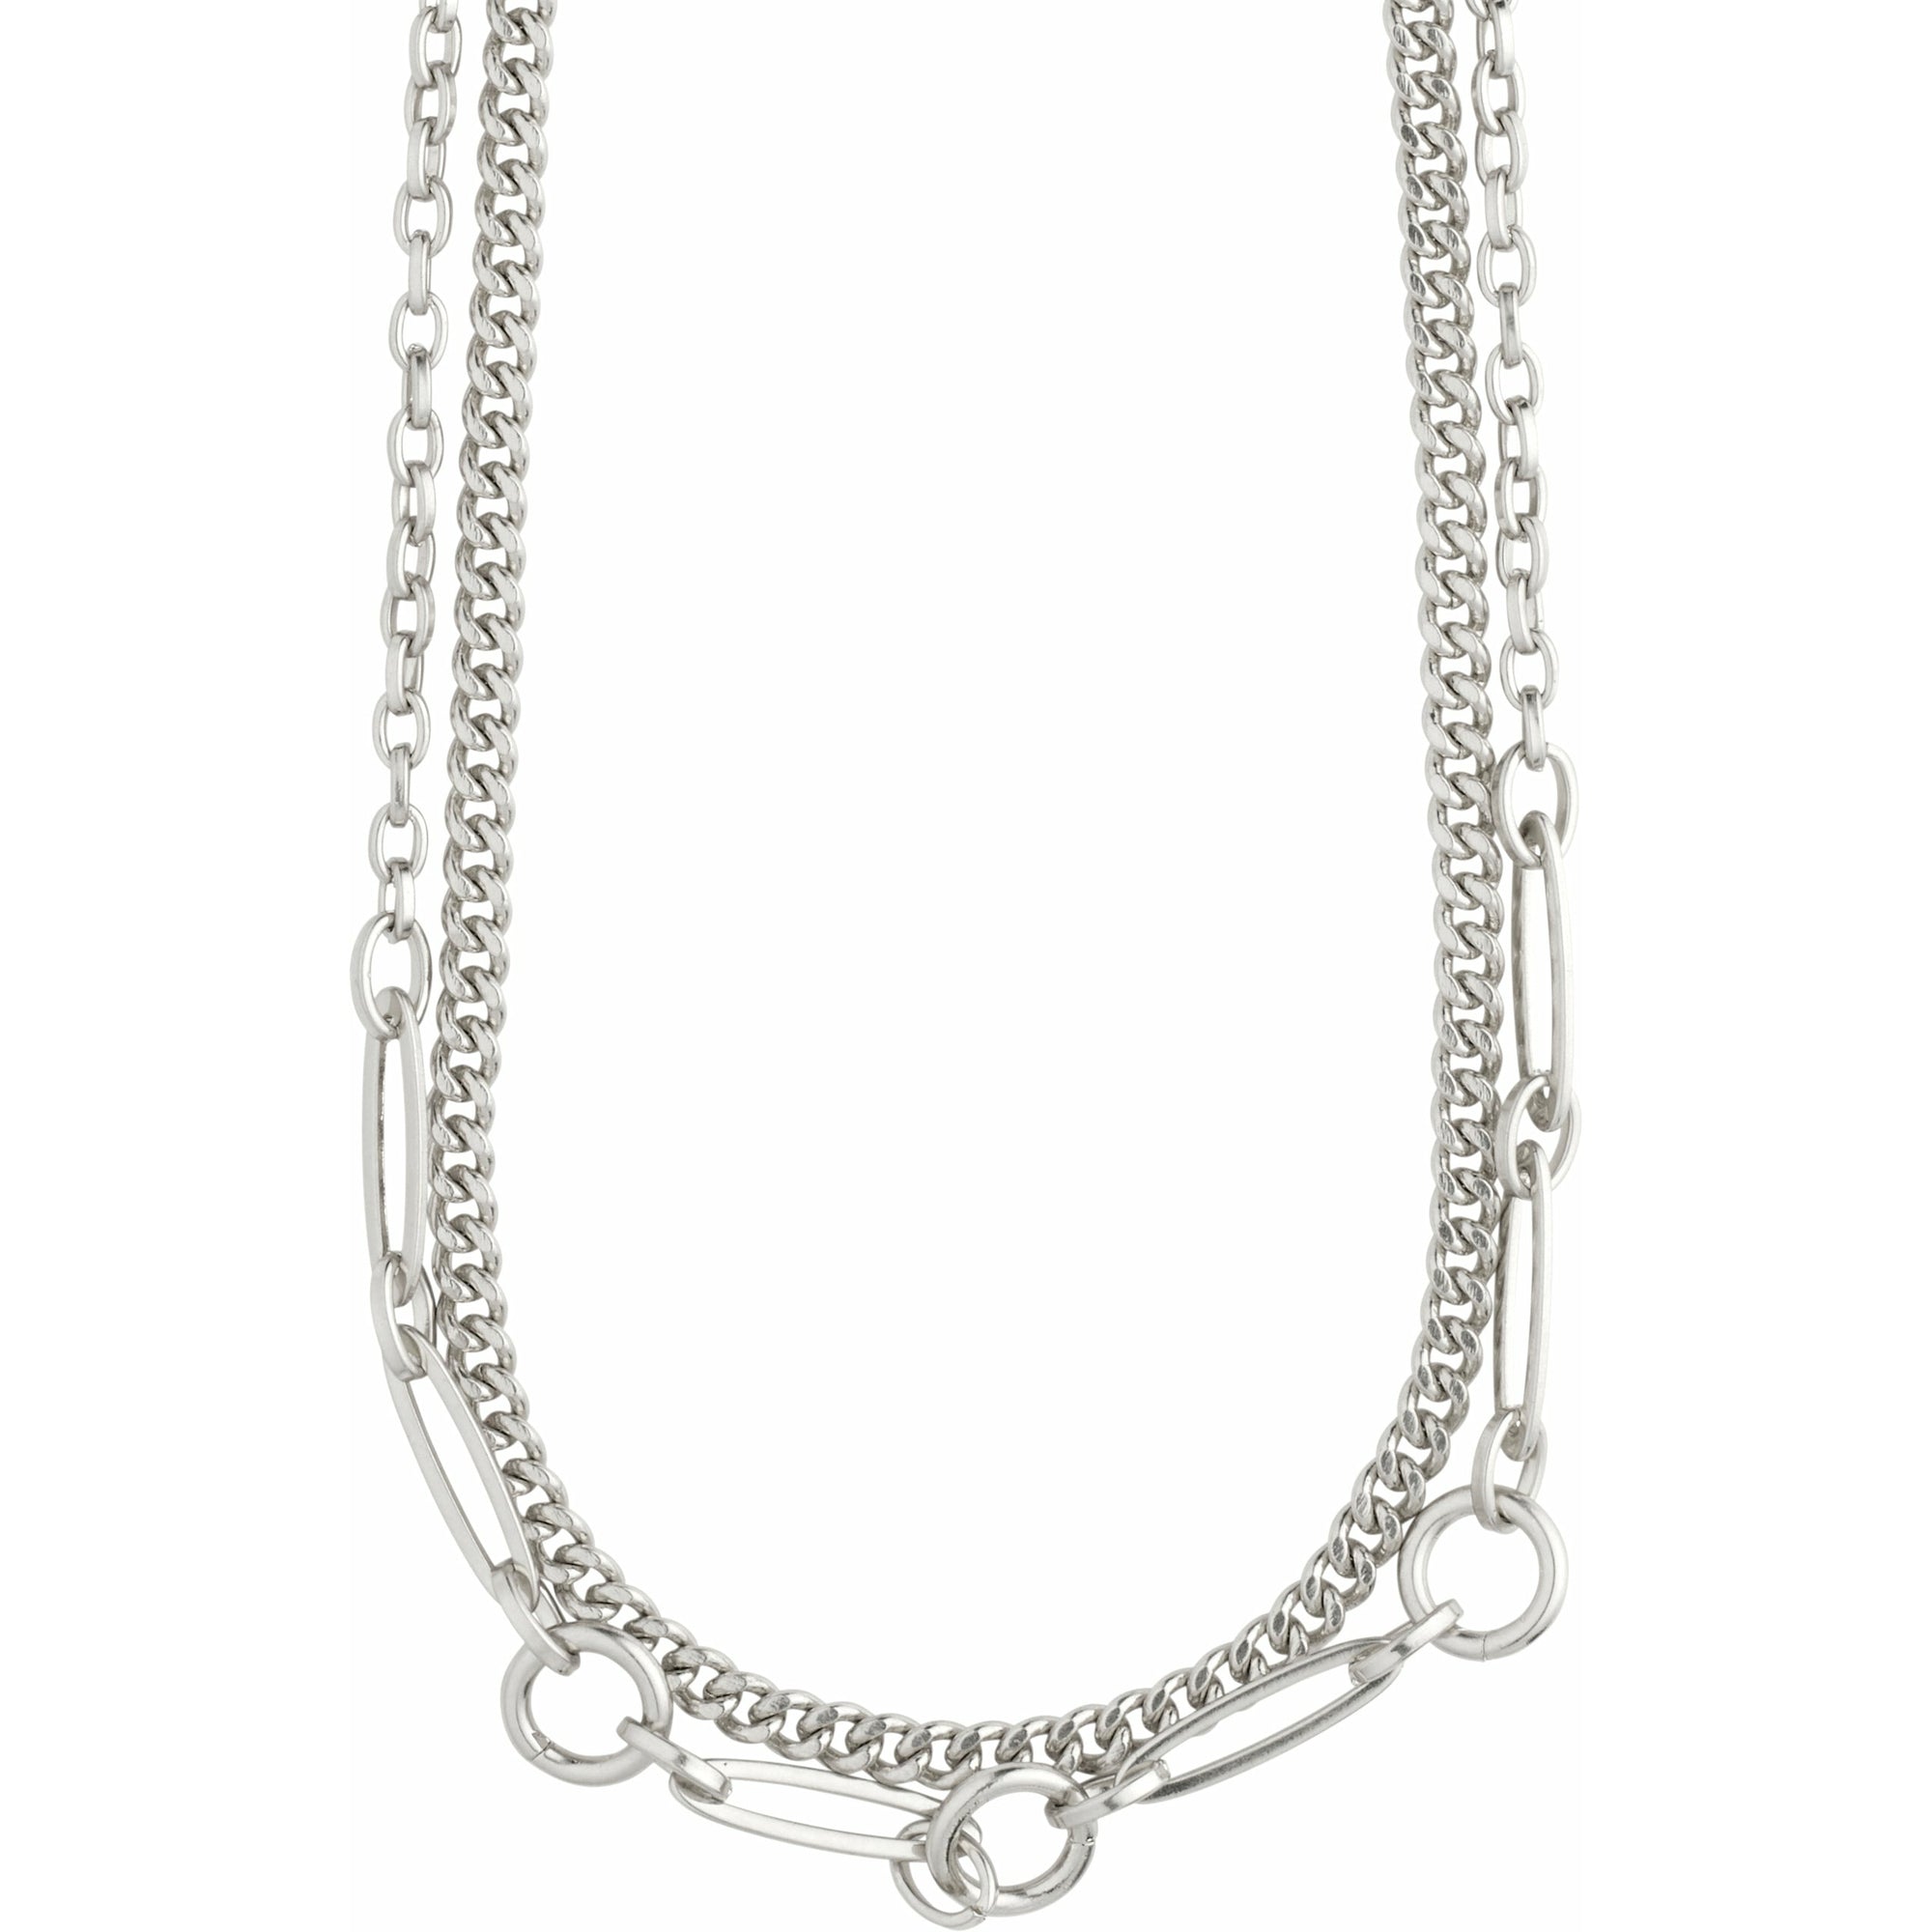 Can't go wrong with this 2-in-1 set! The curb link chain layers perfectly with the unique open work, edgy chain design, special to Pilgrim.   Handmade with heart.  Danish design.   silver plated.  More information: - Curb link chain measures 48cm in length. - Open work chain measures 50cm in length